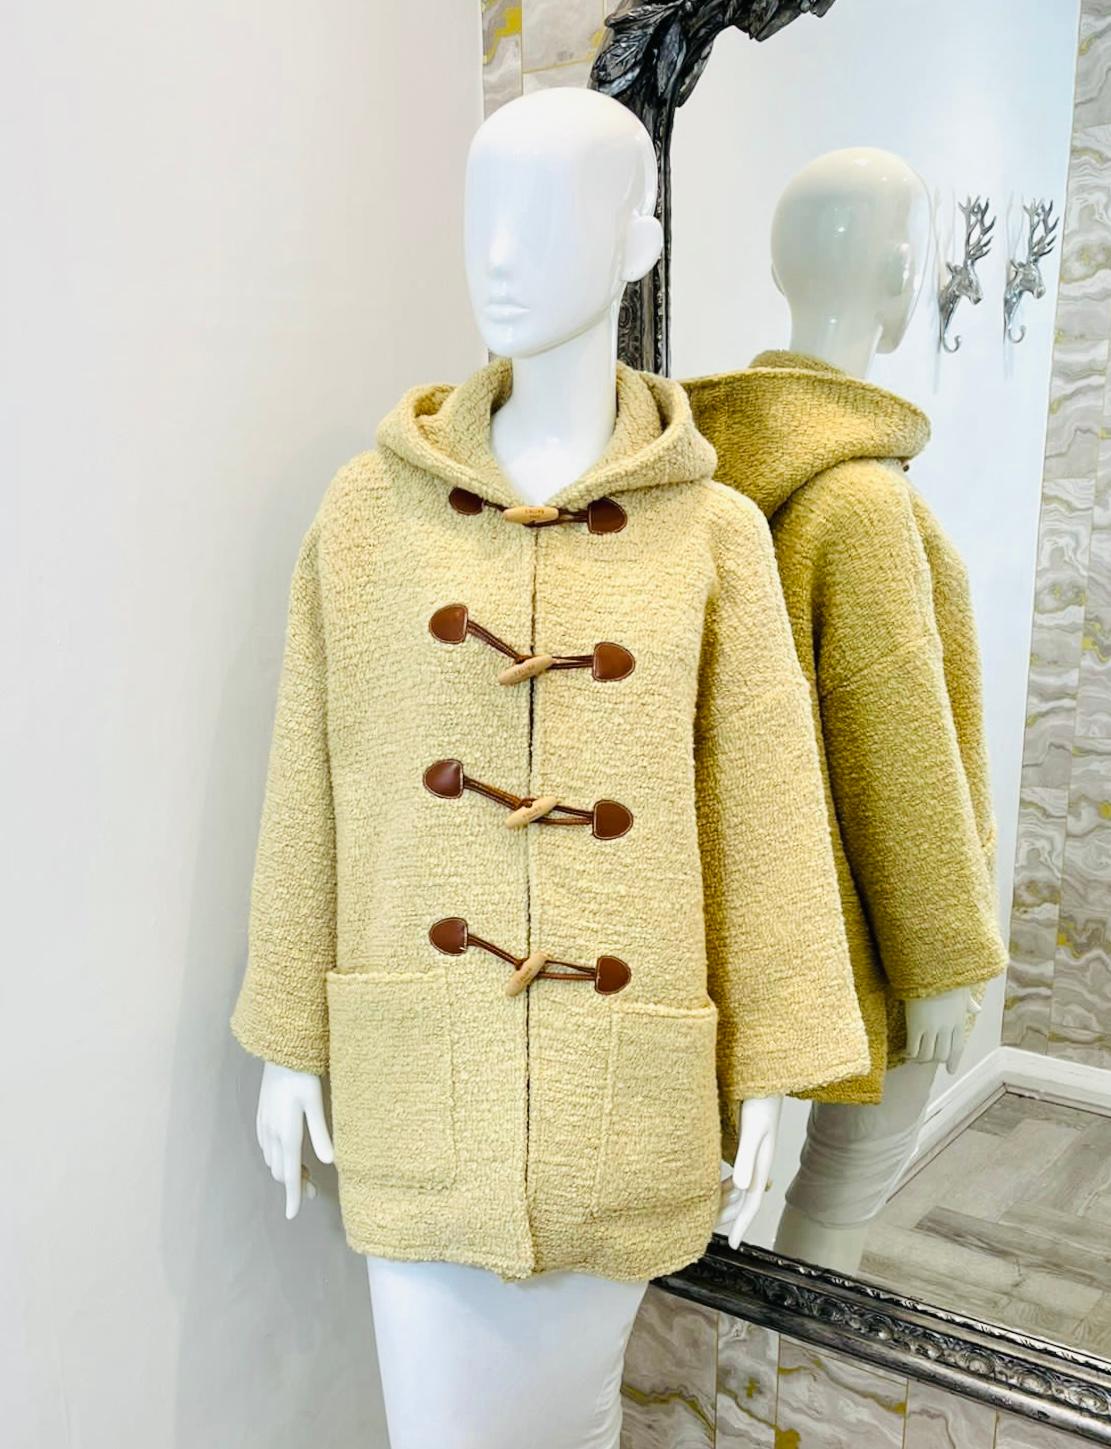 Celine Wool Duffle Coat

Beige hooded coat designed with leather and wood Brandenburg closure detailed with 'Celine Paris' logo engraved.

Featuring side slits and wide open pockets on the sides. Rrp £2250

Size – 36FR

Condition – Very Good (Small